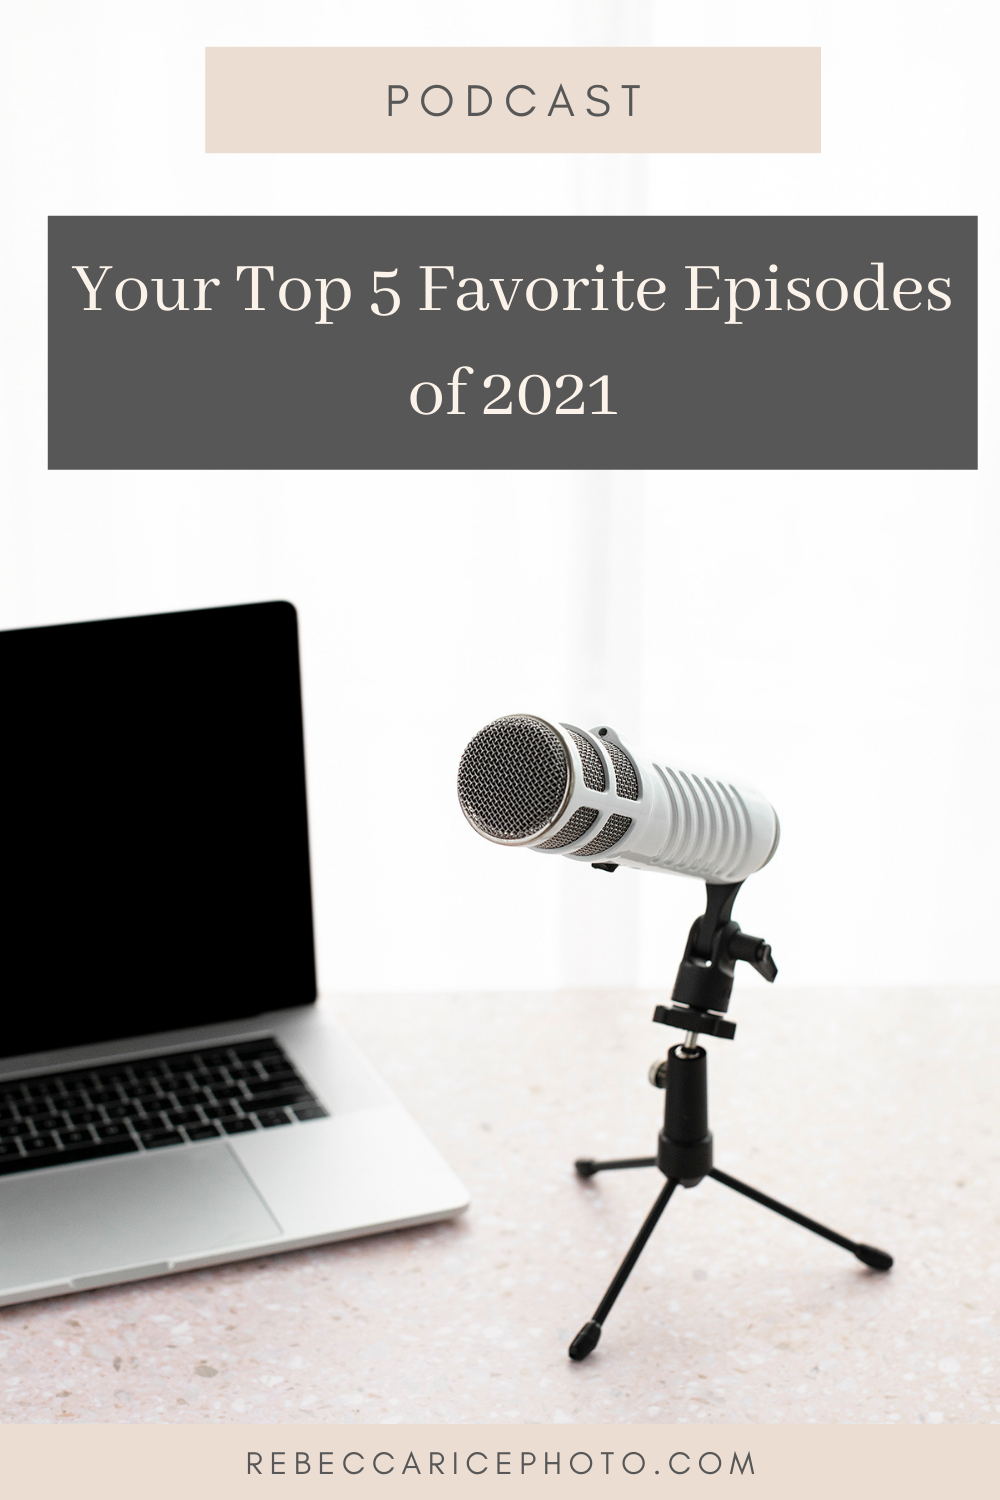 Your Top 5 Favorite Podcast Episodes of 2021 on the Business Journey Podcast for family photographers shared by Rebecca Rice Photography